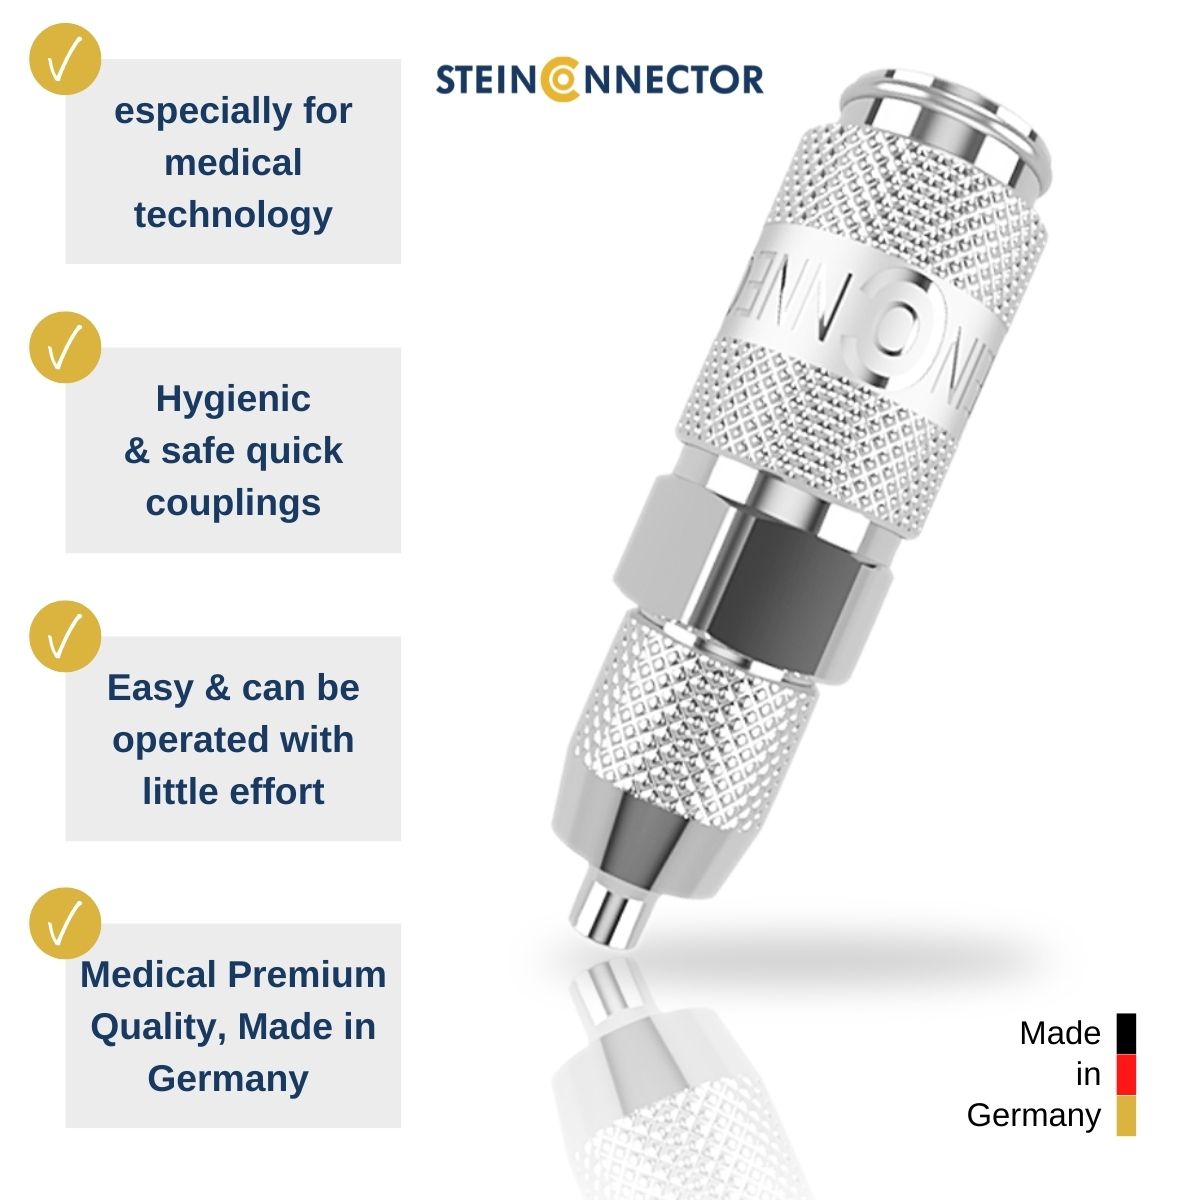 Medical Safety & Quick Couplings for Medical Technology - Made in Germany - MEdical Technology Couplings for Medical Gases, Air & Liquids in Premium Quality